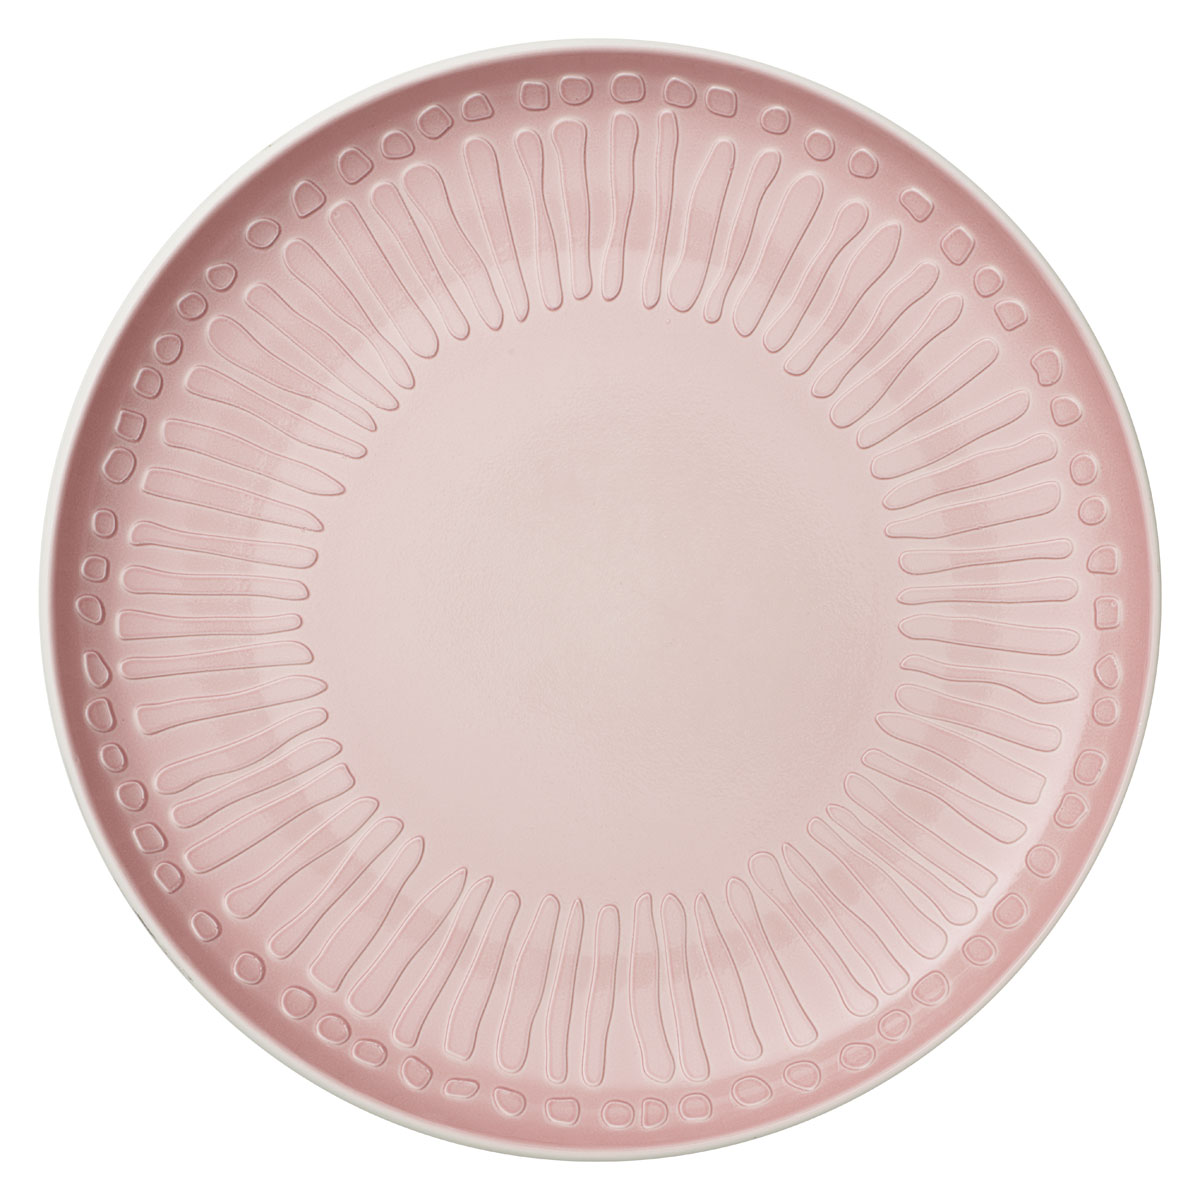 Villeroy and Boch It's My Match Powder Salad Plate Blossom